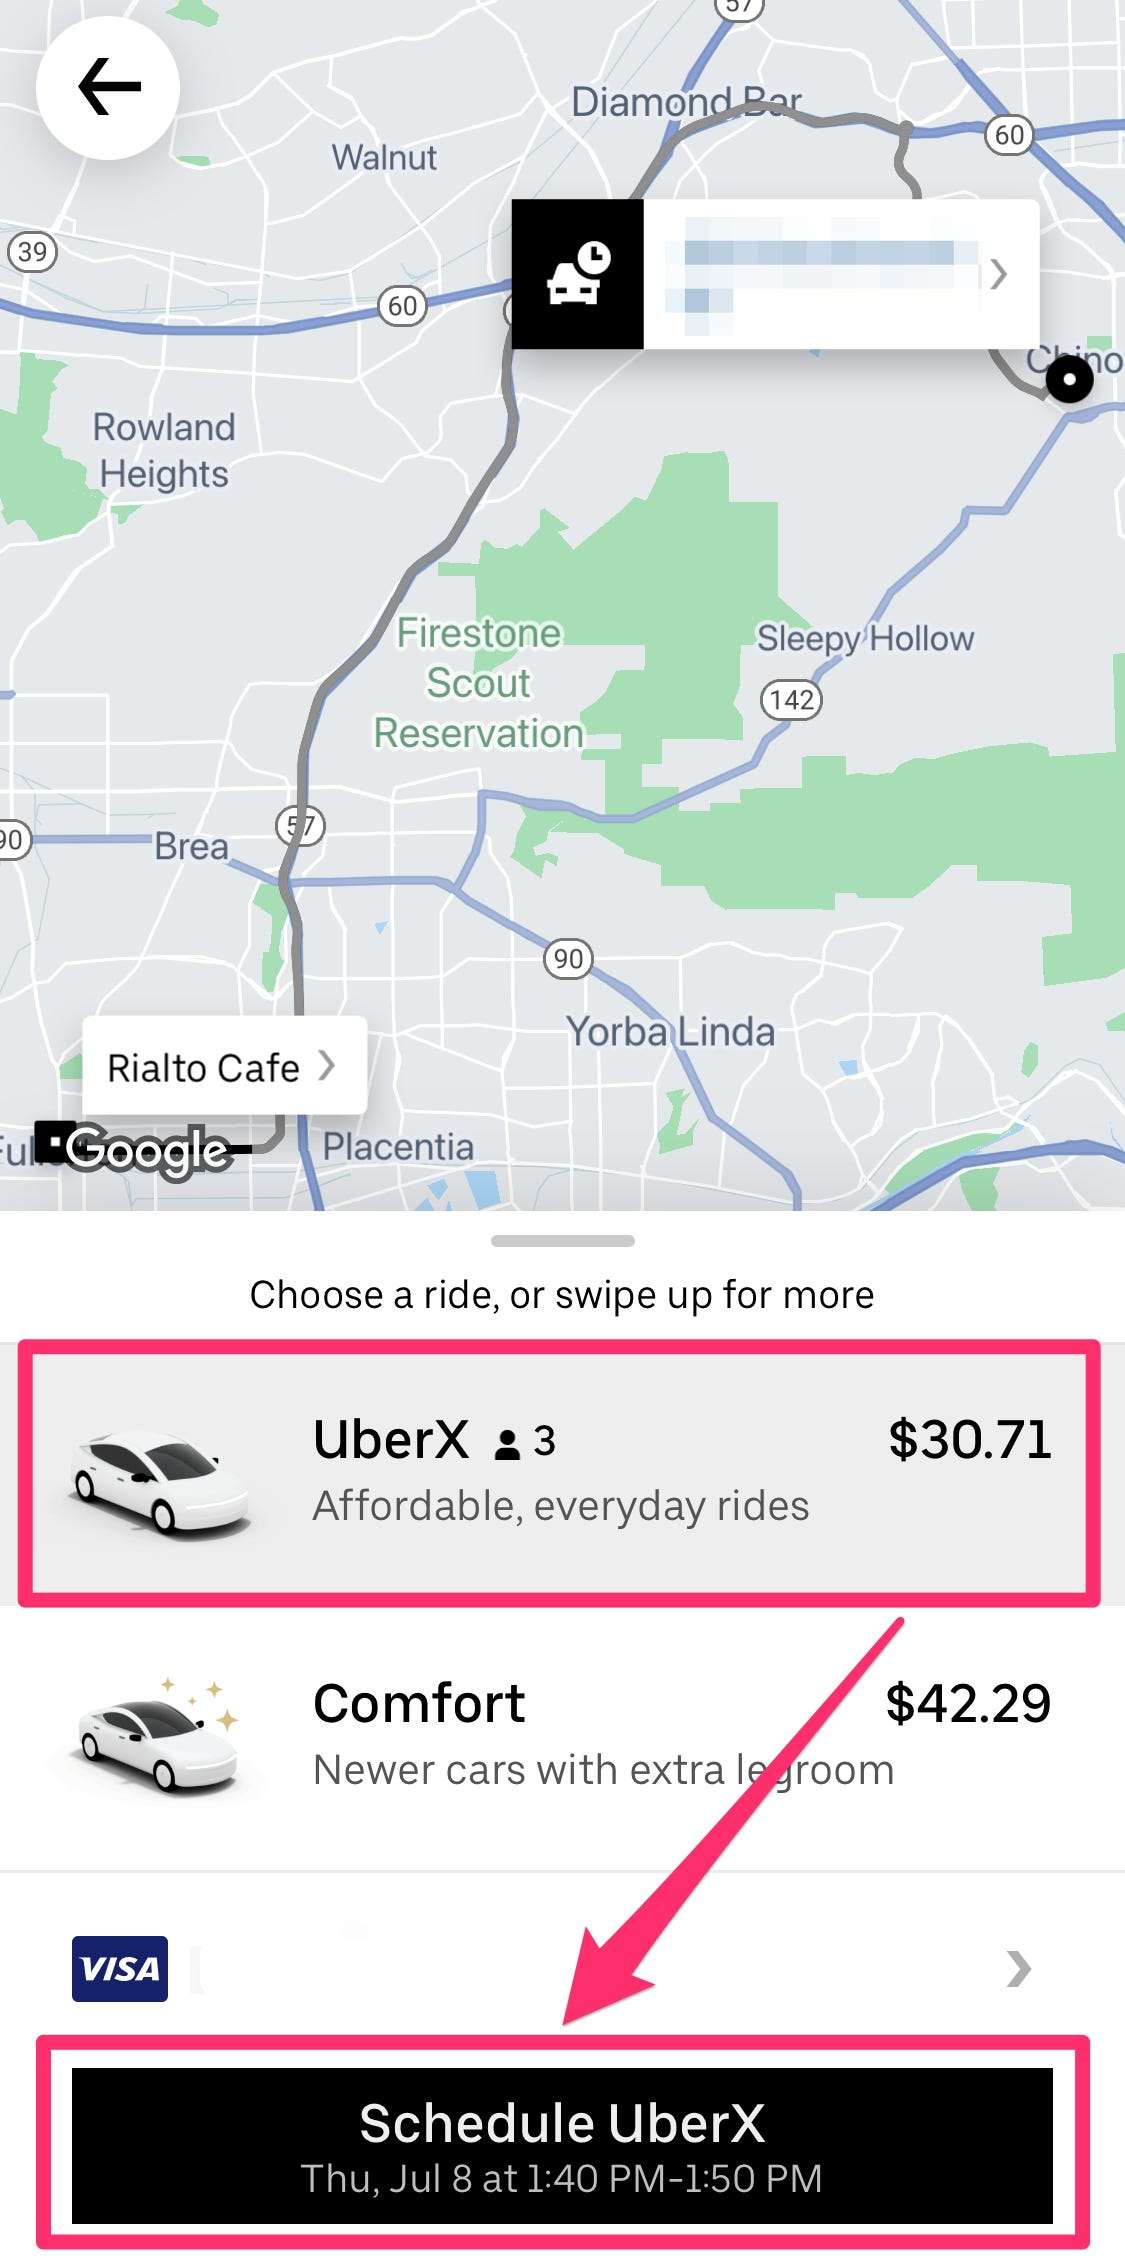 How to schedule an Uber ride in advance, or cancel a scheduled ride if you no longer need it